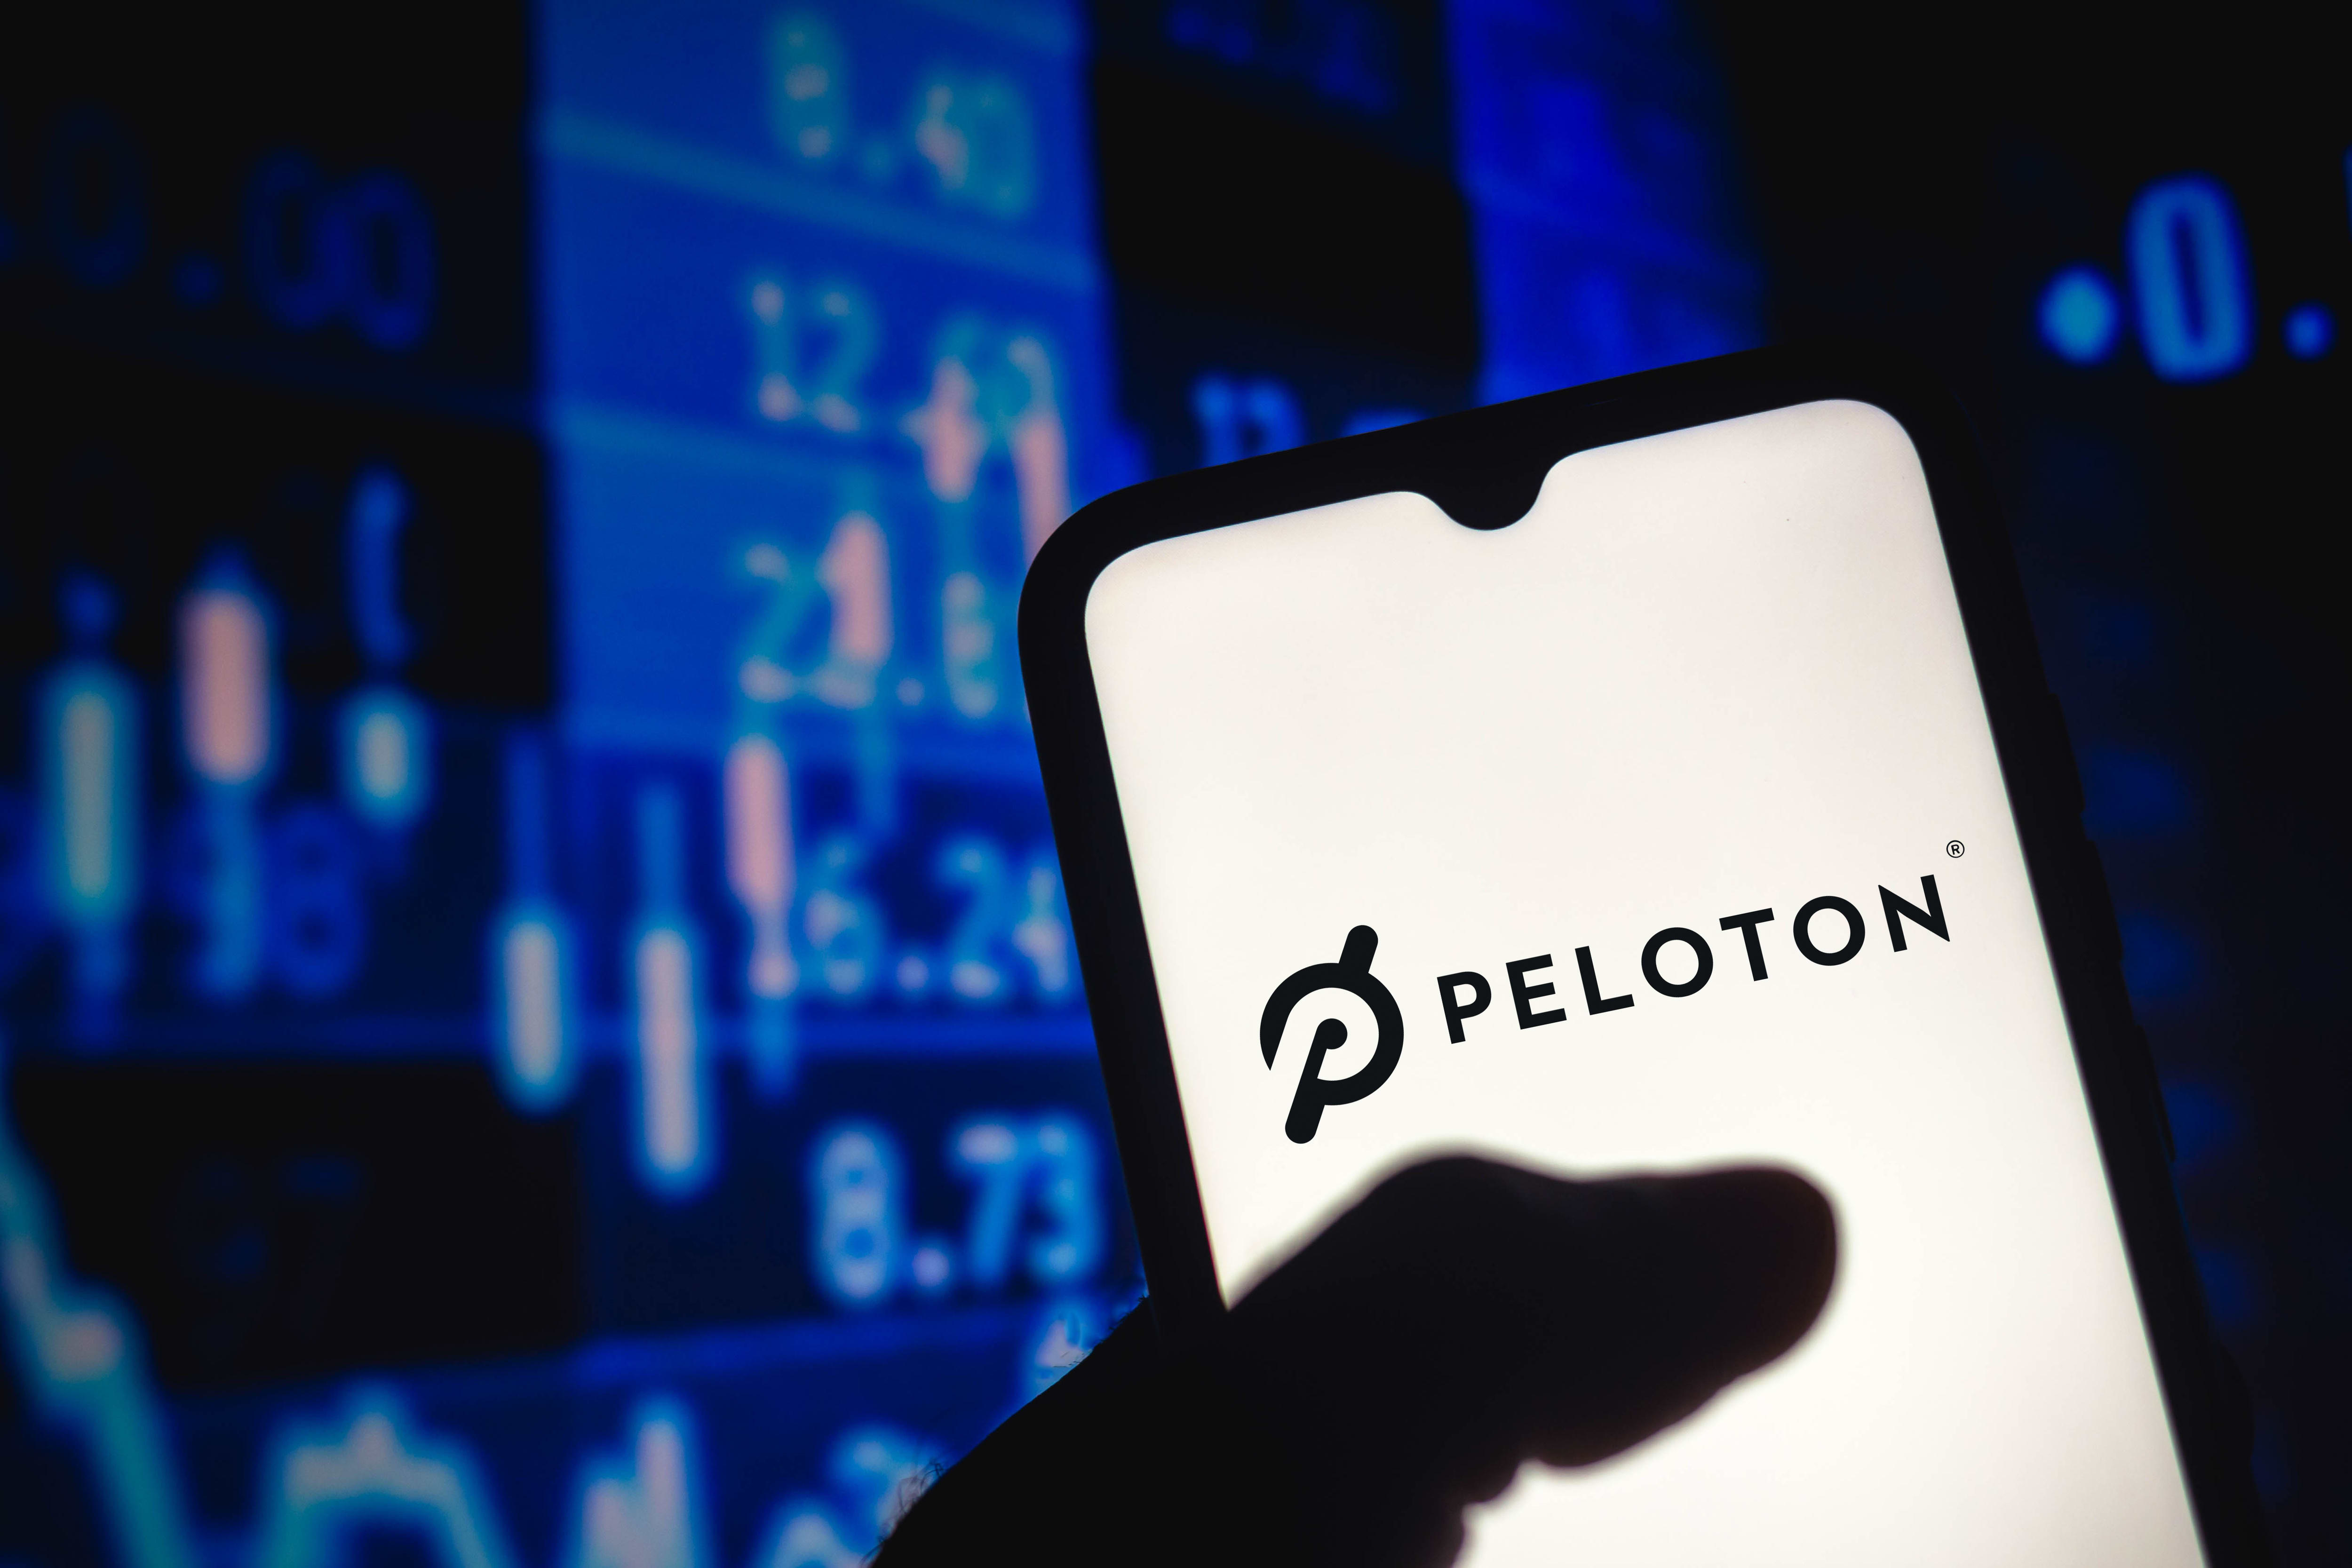 Peloton shares are on the up — but will it last? Here's what Wall Street thinks